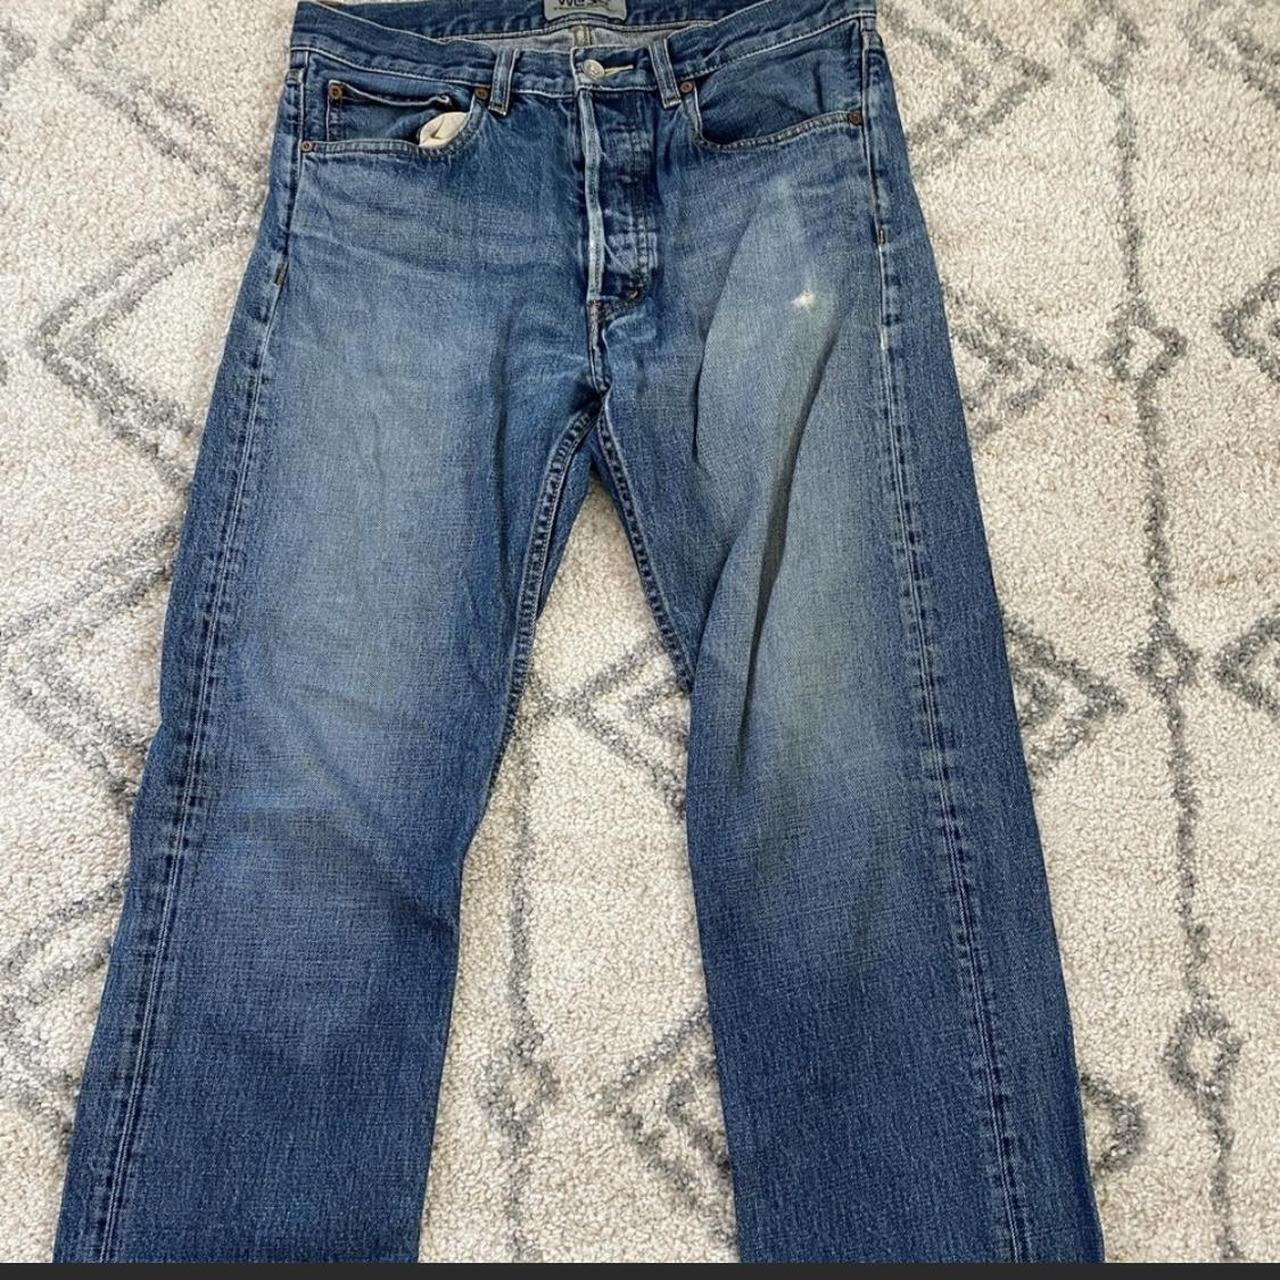 Vintage Wesc Jeans Distressed with light signs of... - Depop